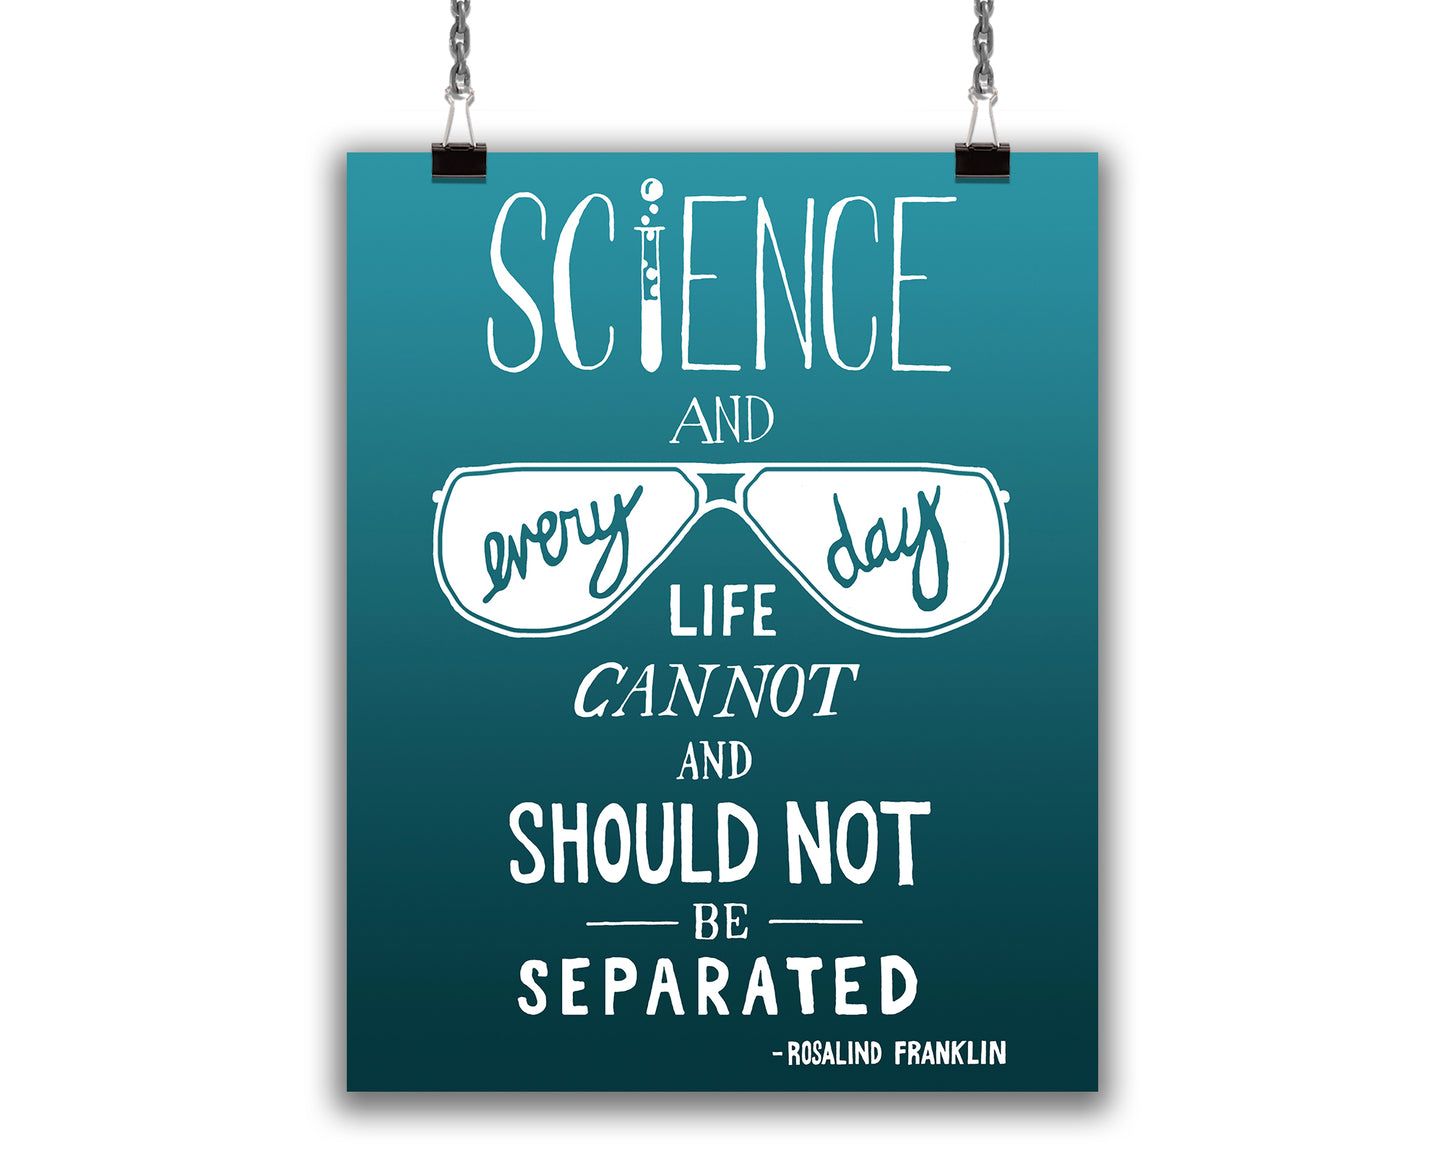 art print with illustrated white text that reads "Science and every day life cannot and should not be separated - Rosalind Franklin" on a gradient aqua blue background